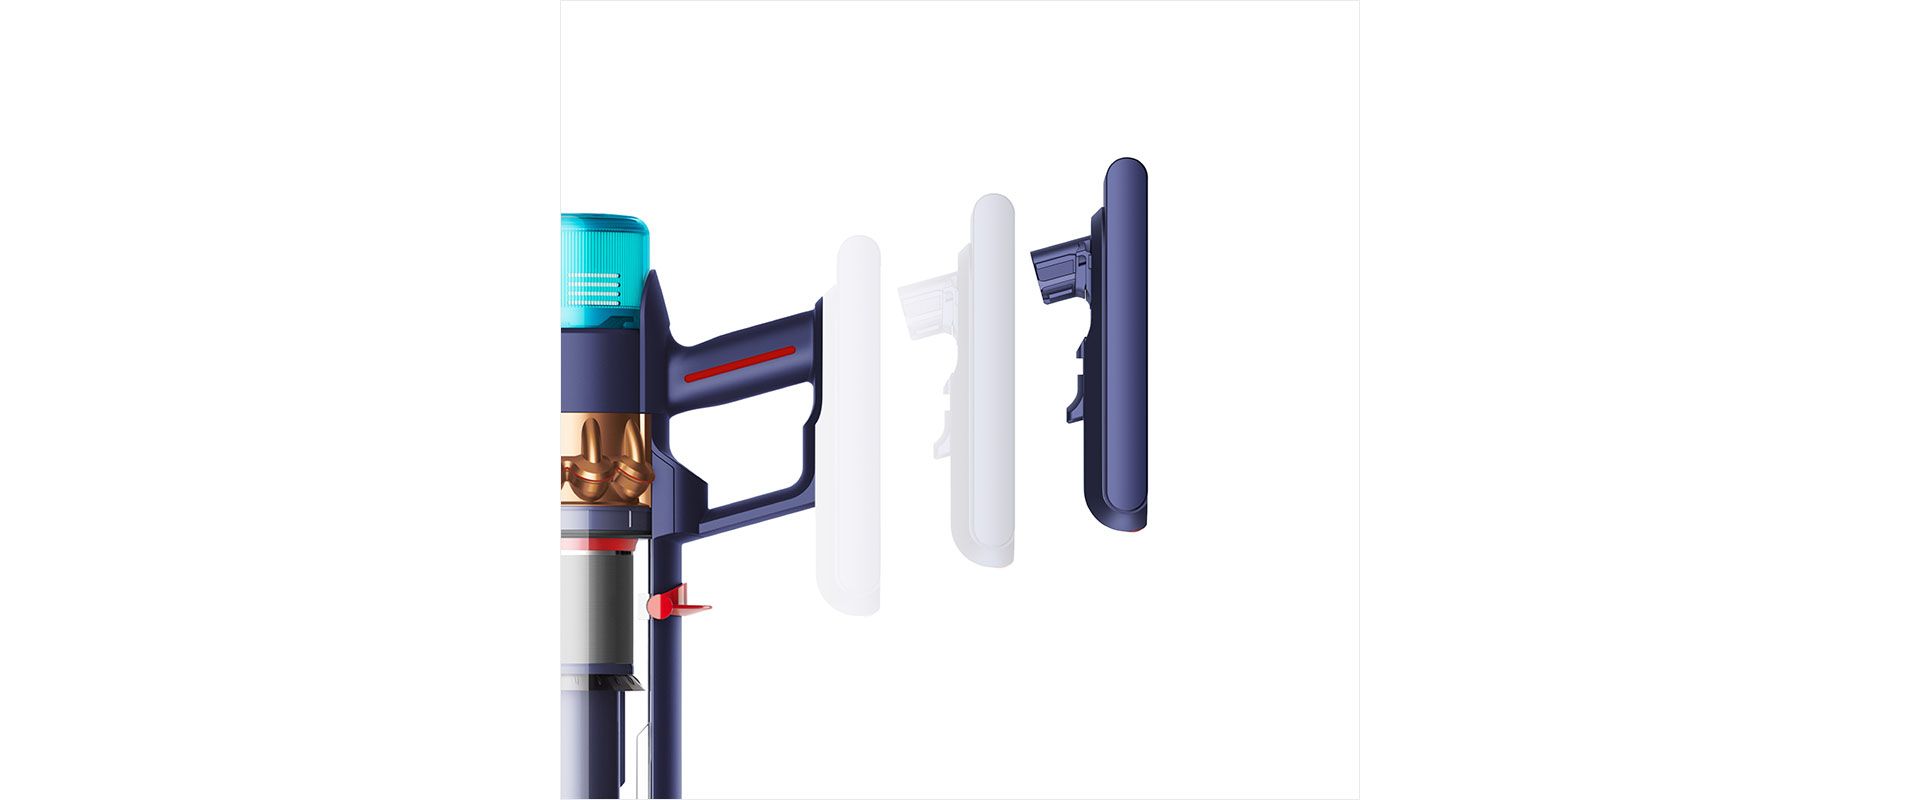 Dyson swappable battery clicking into the machine handle.